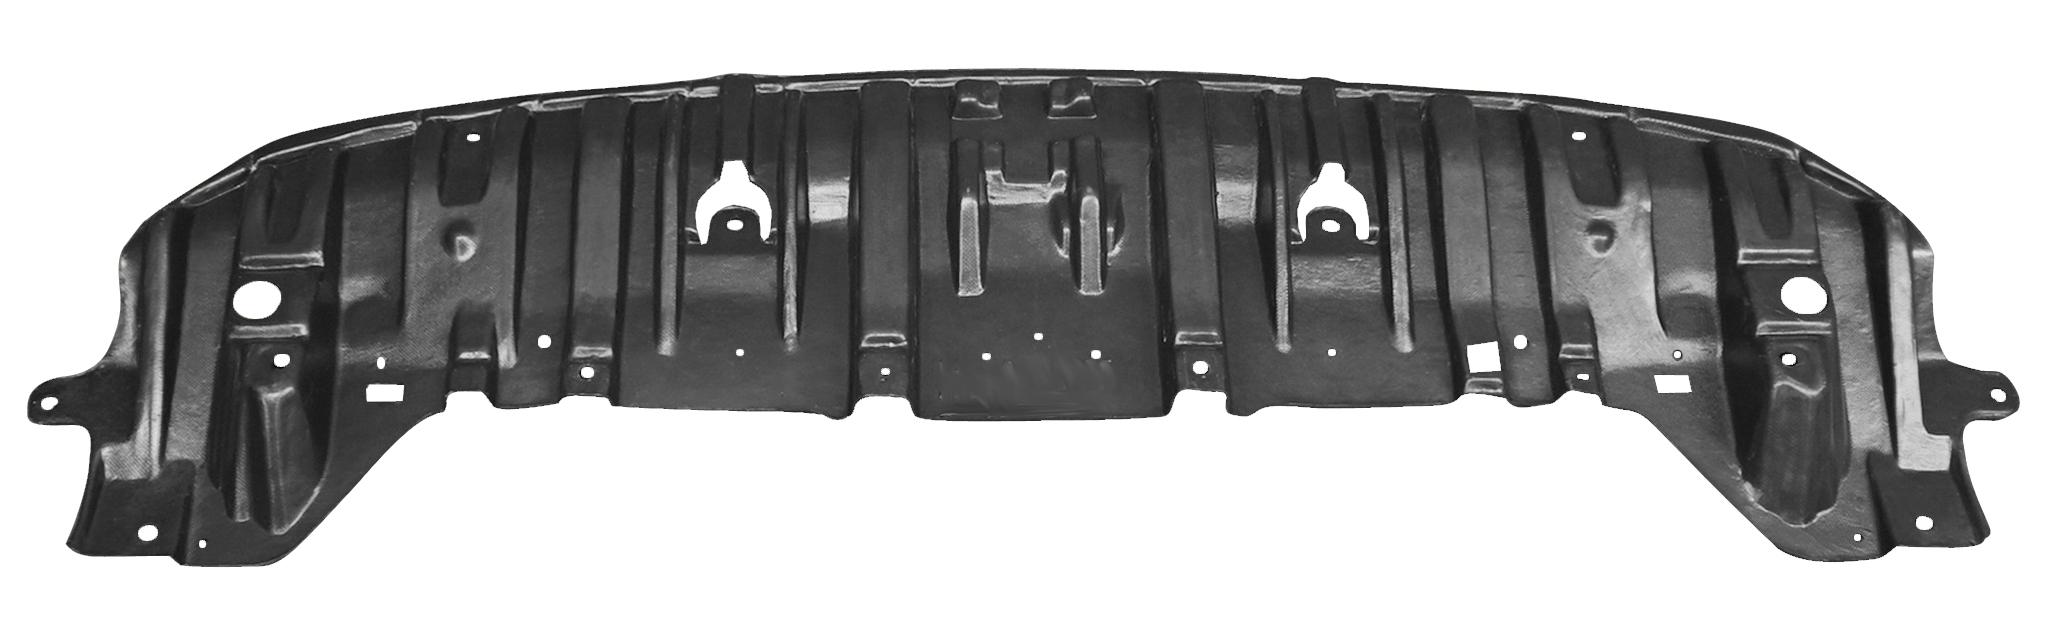 Aftermarket UNDER ENGINE COVERS for TOYOTA - PRIUS, PRIUS,12-15,Lower engine cover